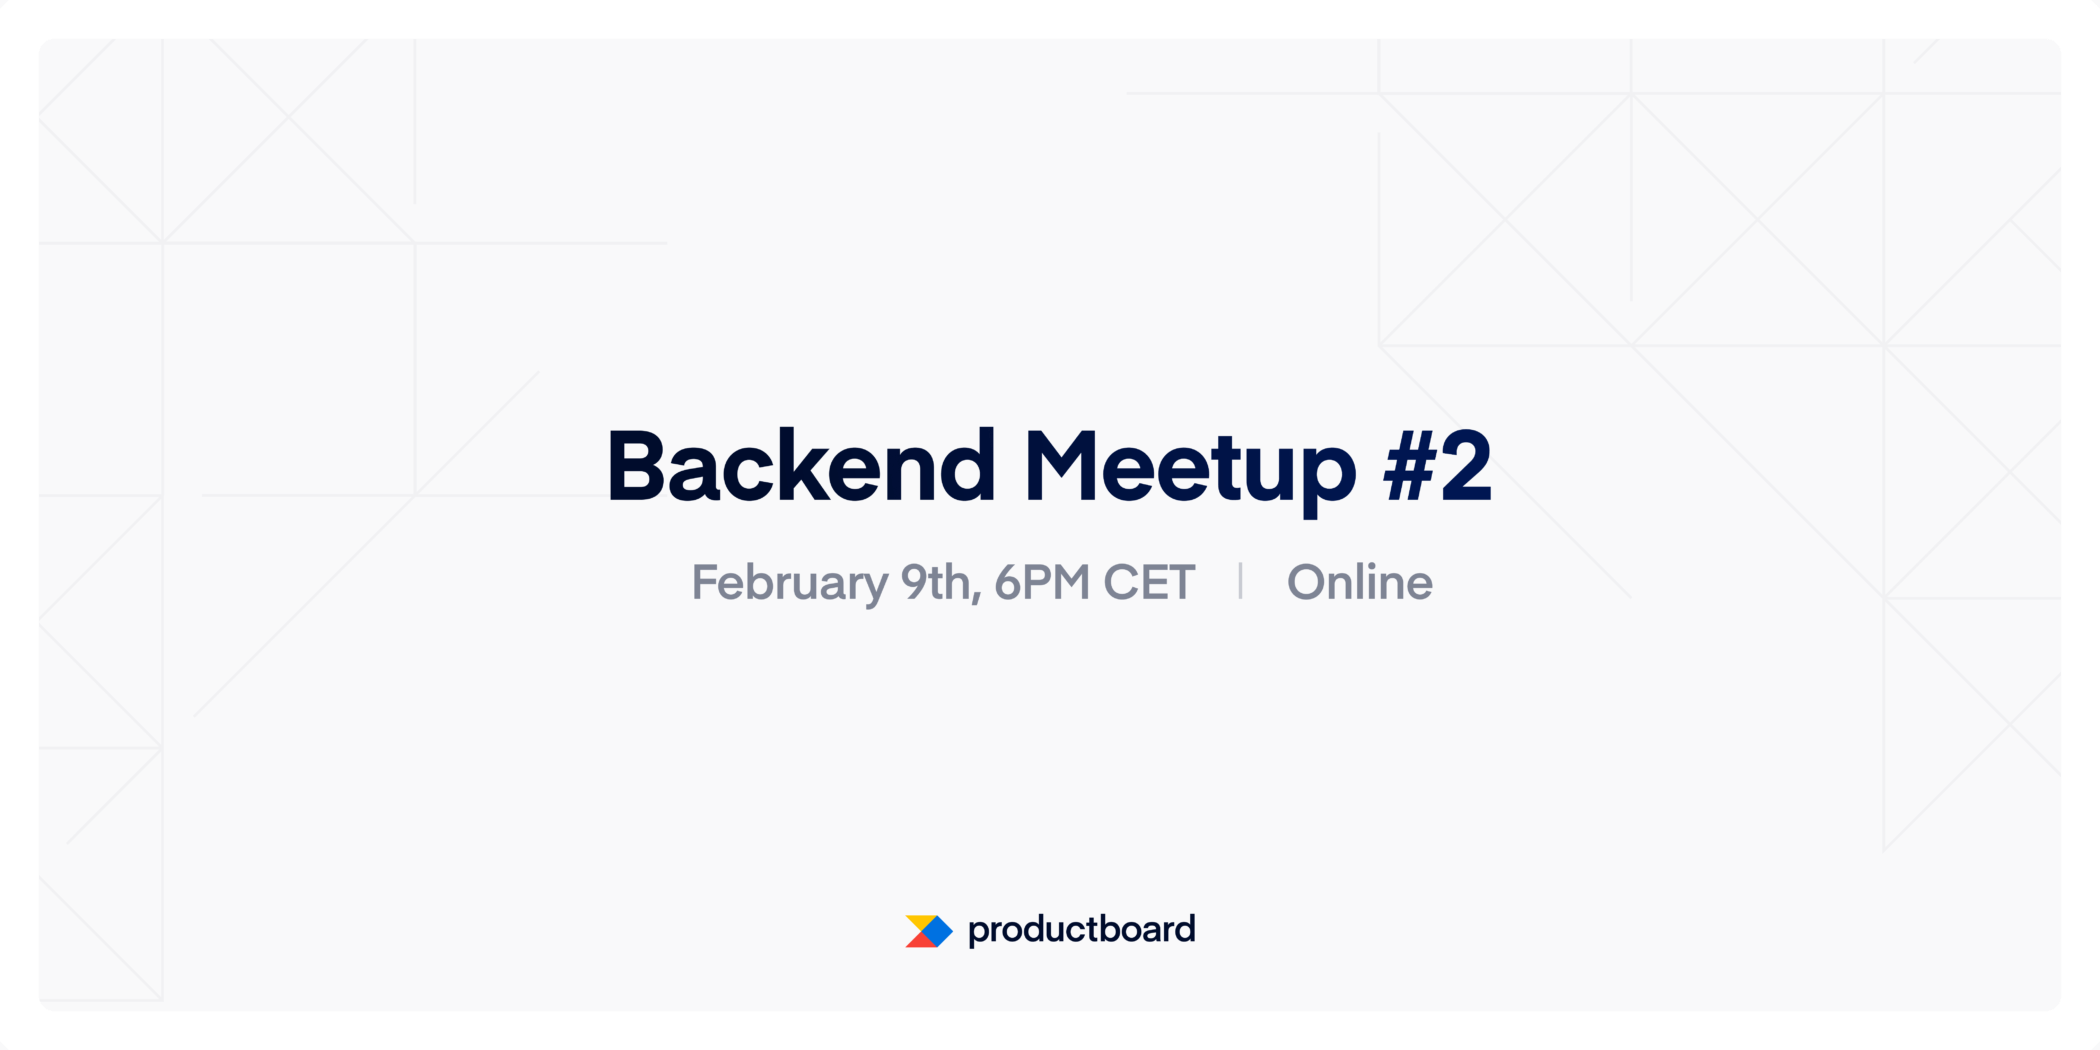 2/9/22 Productboard Backend Meetup